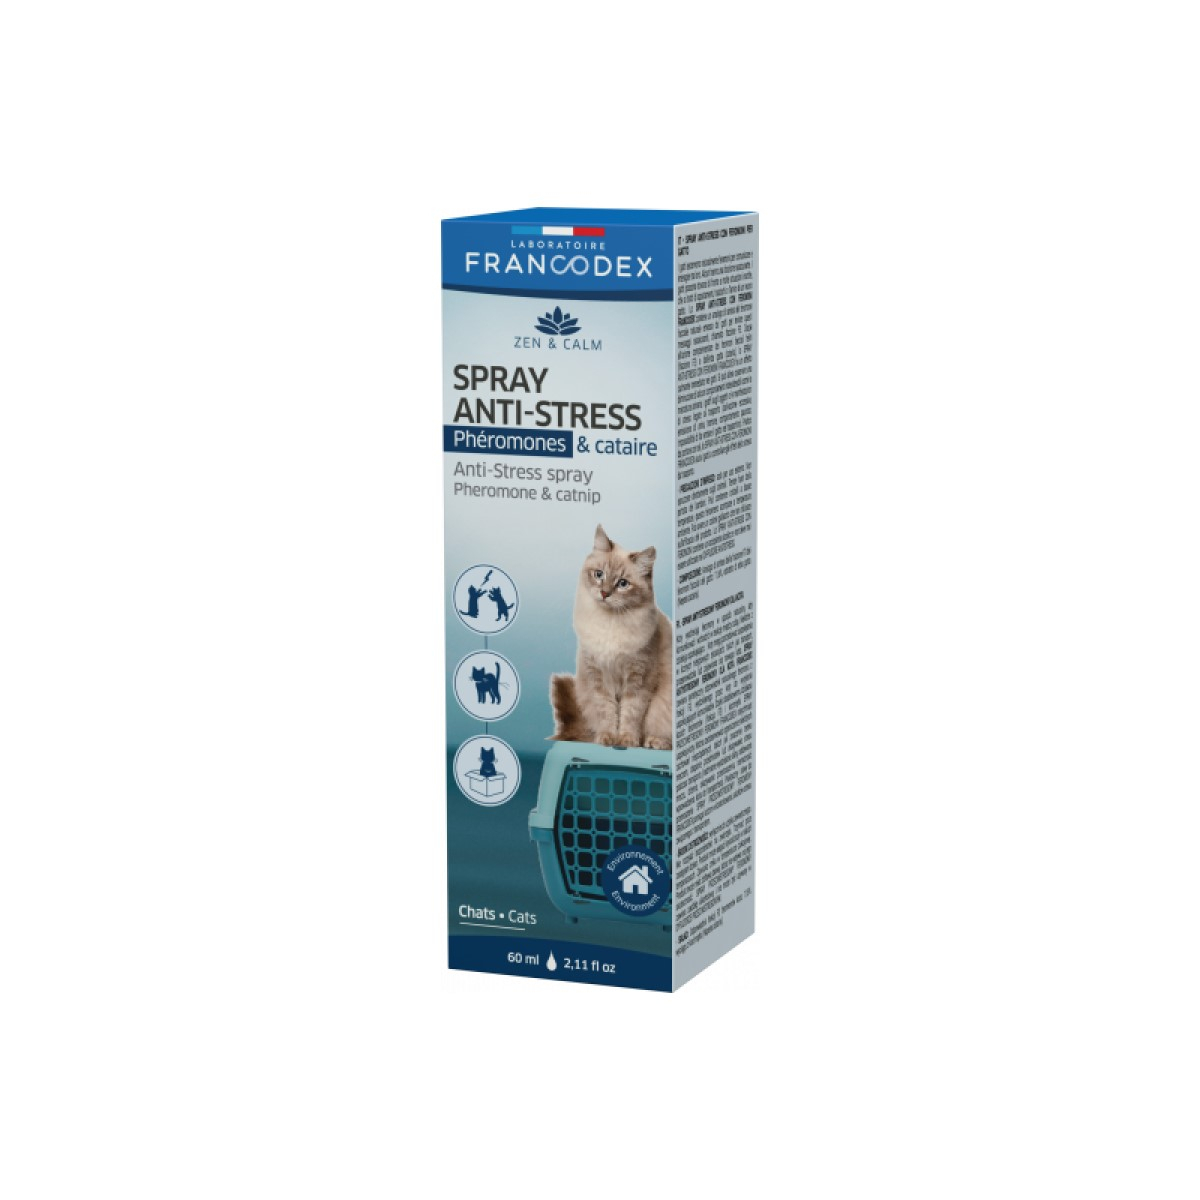 Francodex Spray anti-stress Phéromones & Cataire pour chats